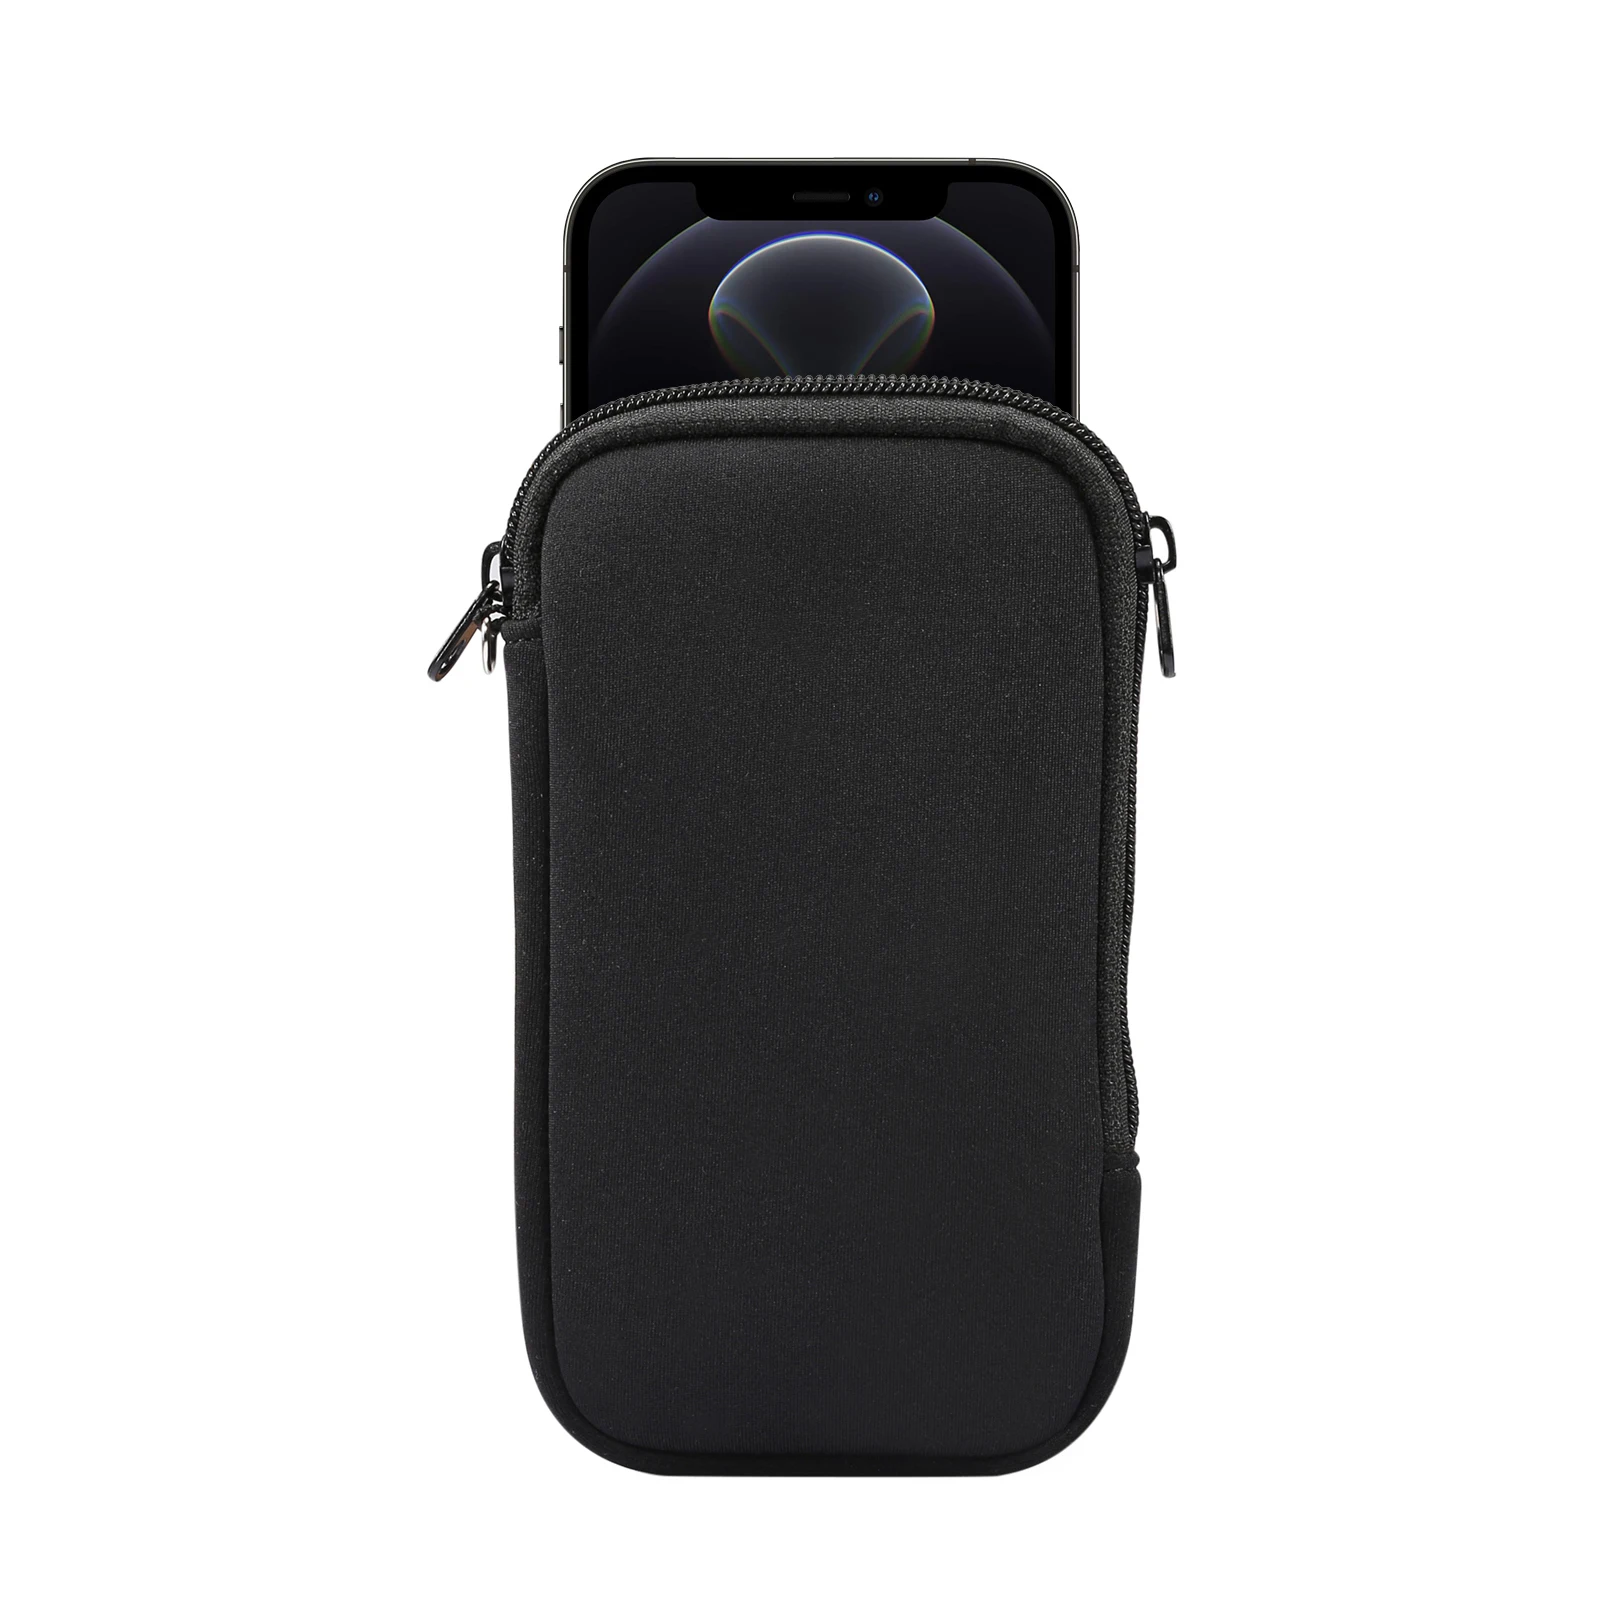 Universal Neoprene Zipper Phone Bag Pouch For iPhone 12 13 14 11 Pro Max 6 7 8 Plus X XR XS Shockproof Cover